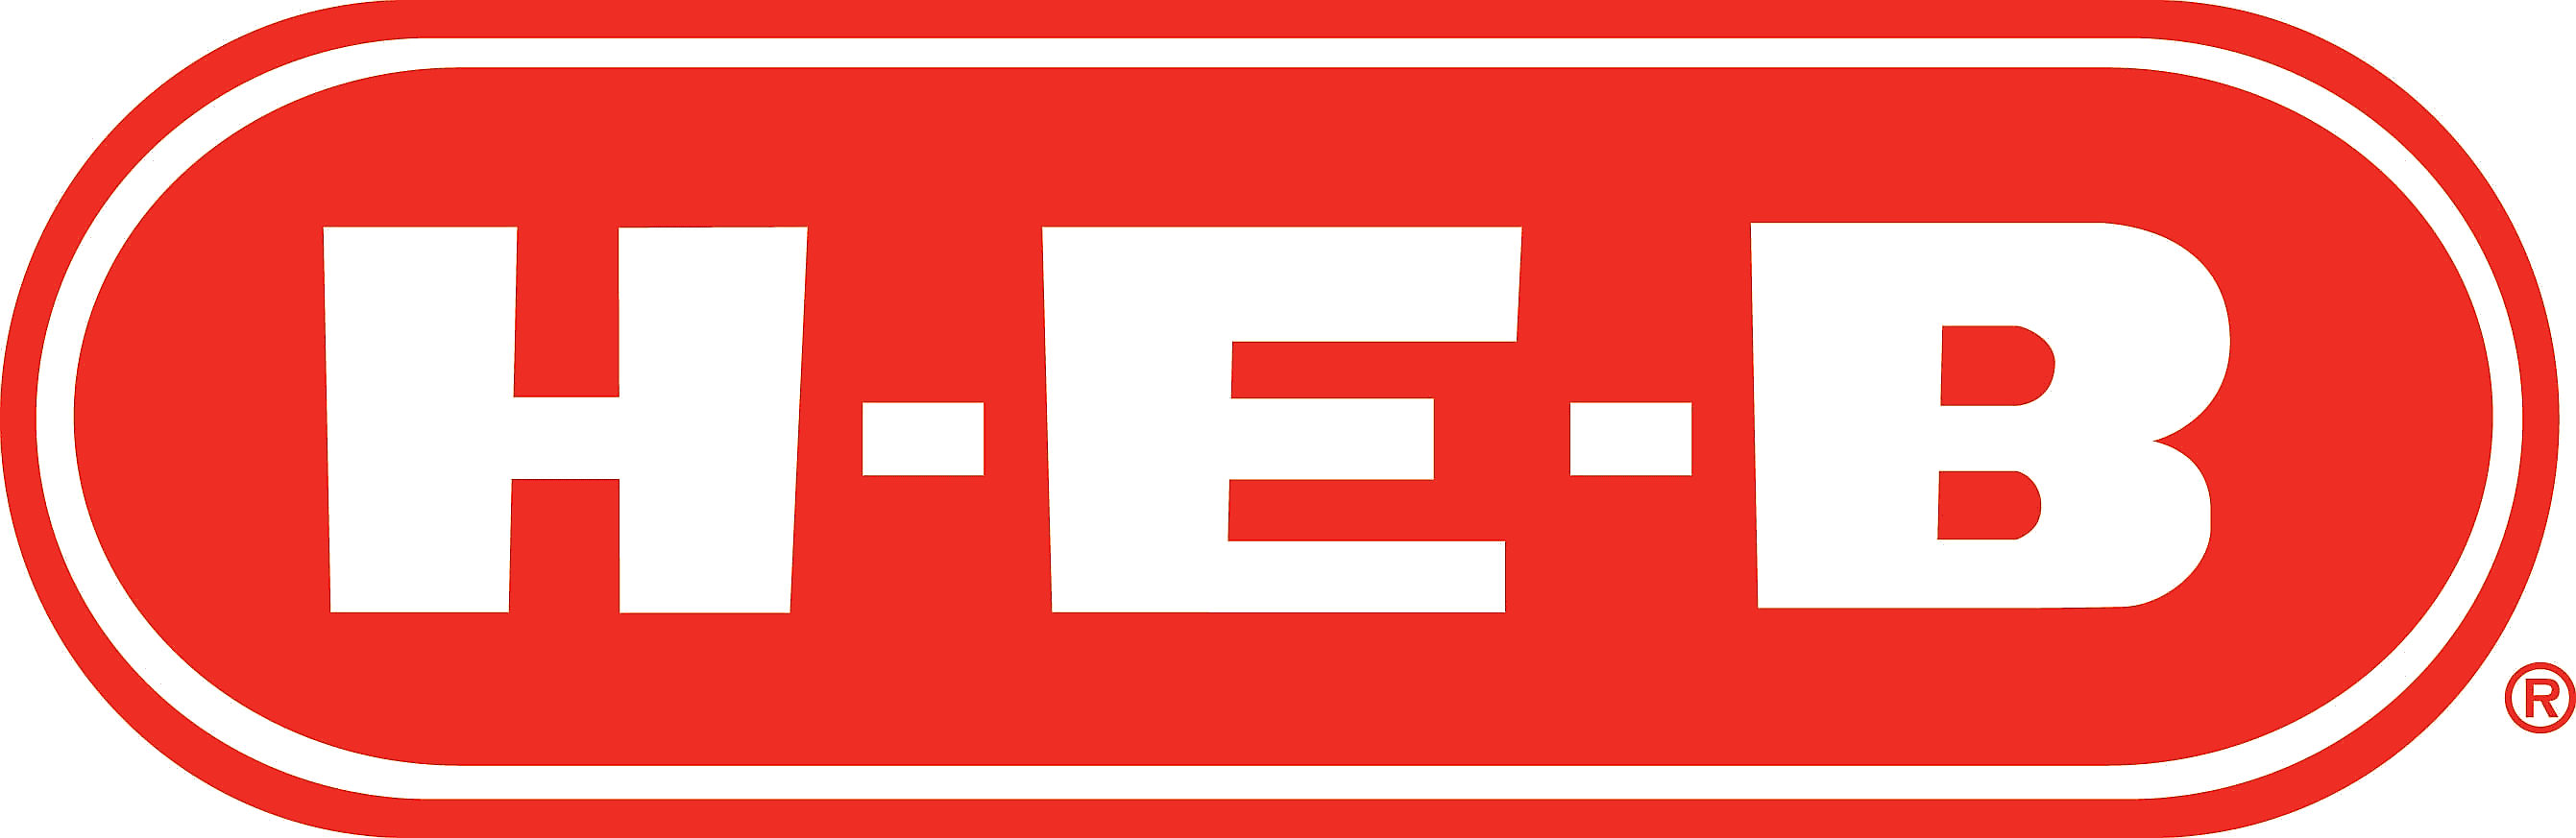 Red Rectangle Company Logo - Logo of the HEB Grocery Company, LP.png